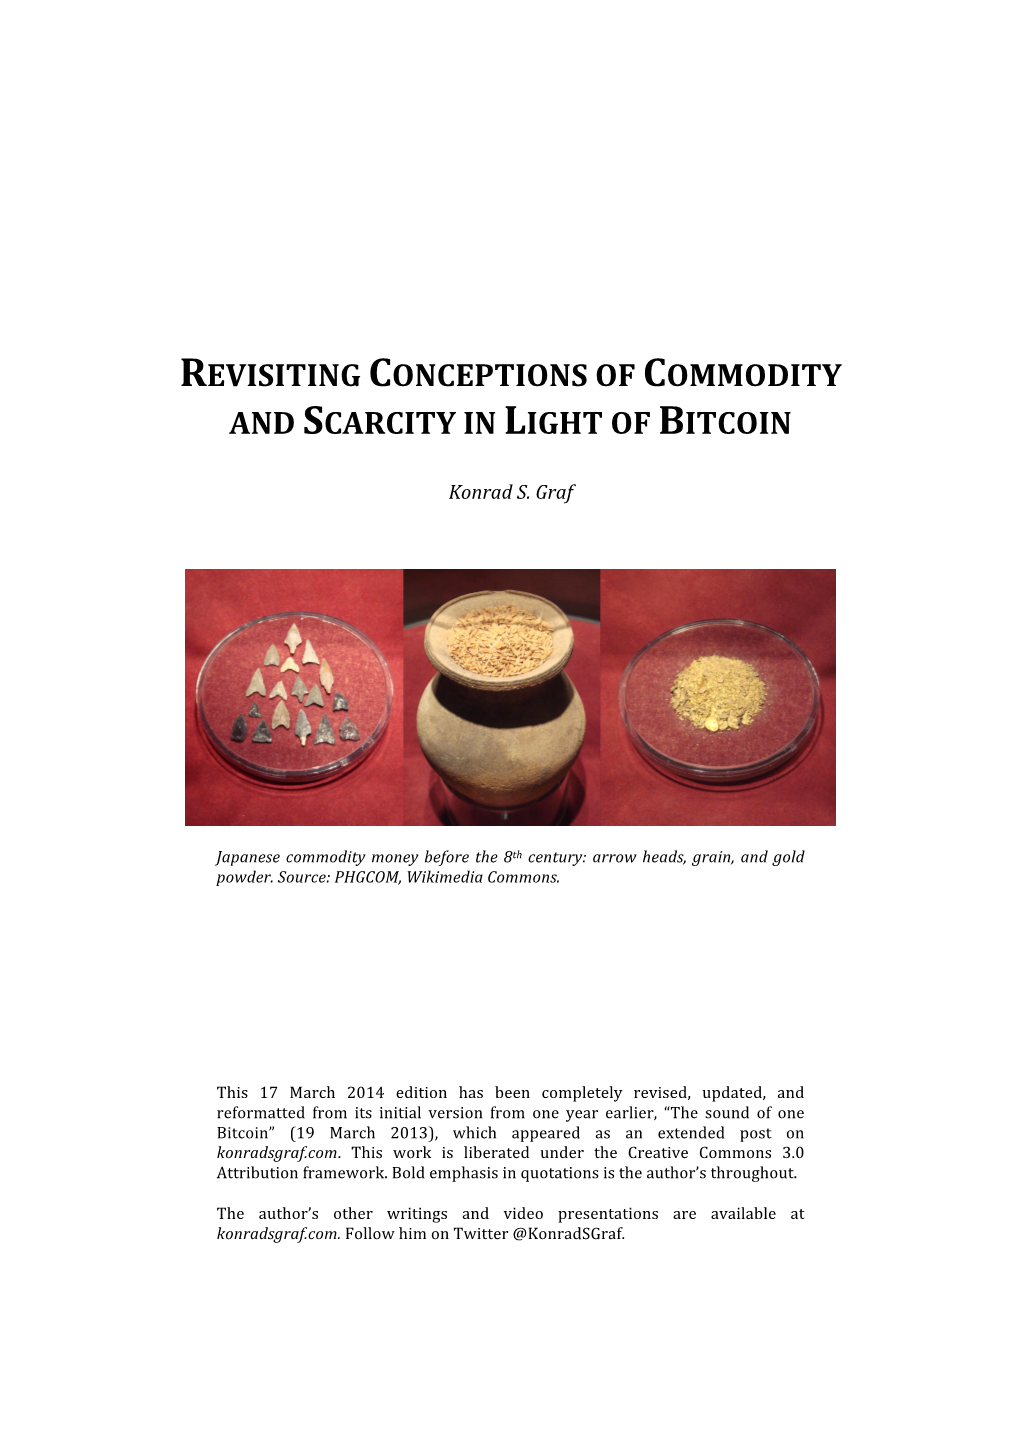 Revisiting Conceptions of Commodity and Scarcity in Light of Bitcoin